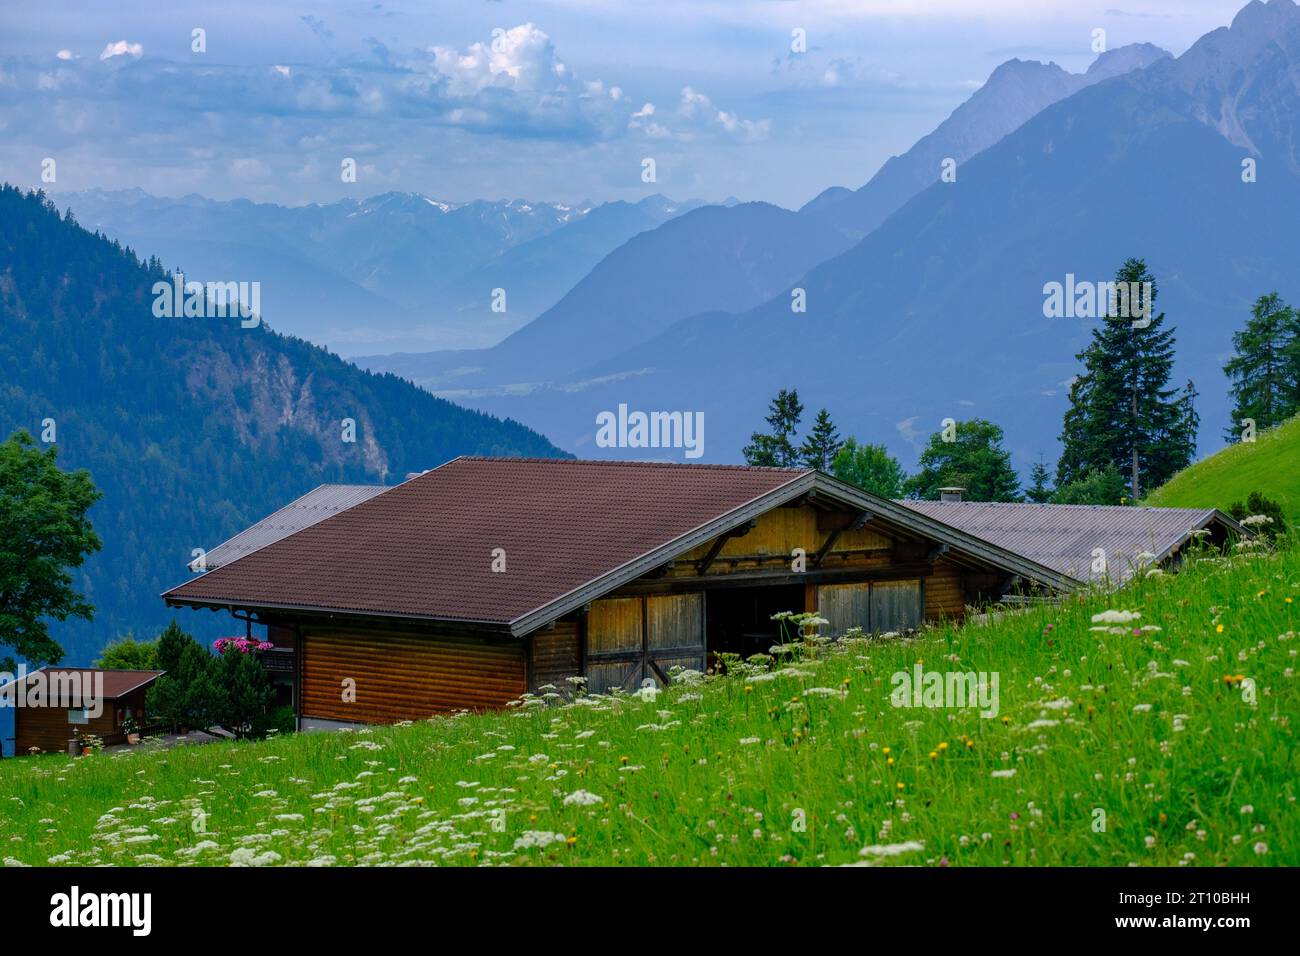 Traditional wooden houses on countryside slopes. Meadows with wild flowers, trees & mountains. Reith im Alpbachtal, Alpbachtal valley, Tyrol, Austria. Stock Photo